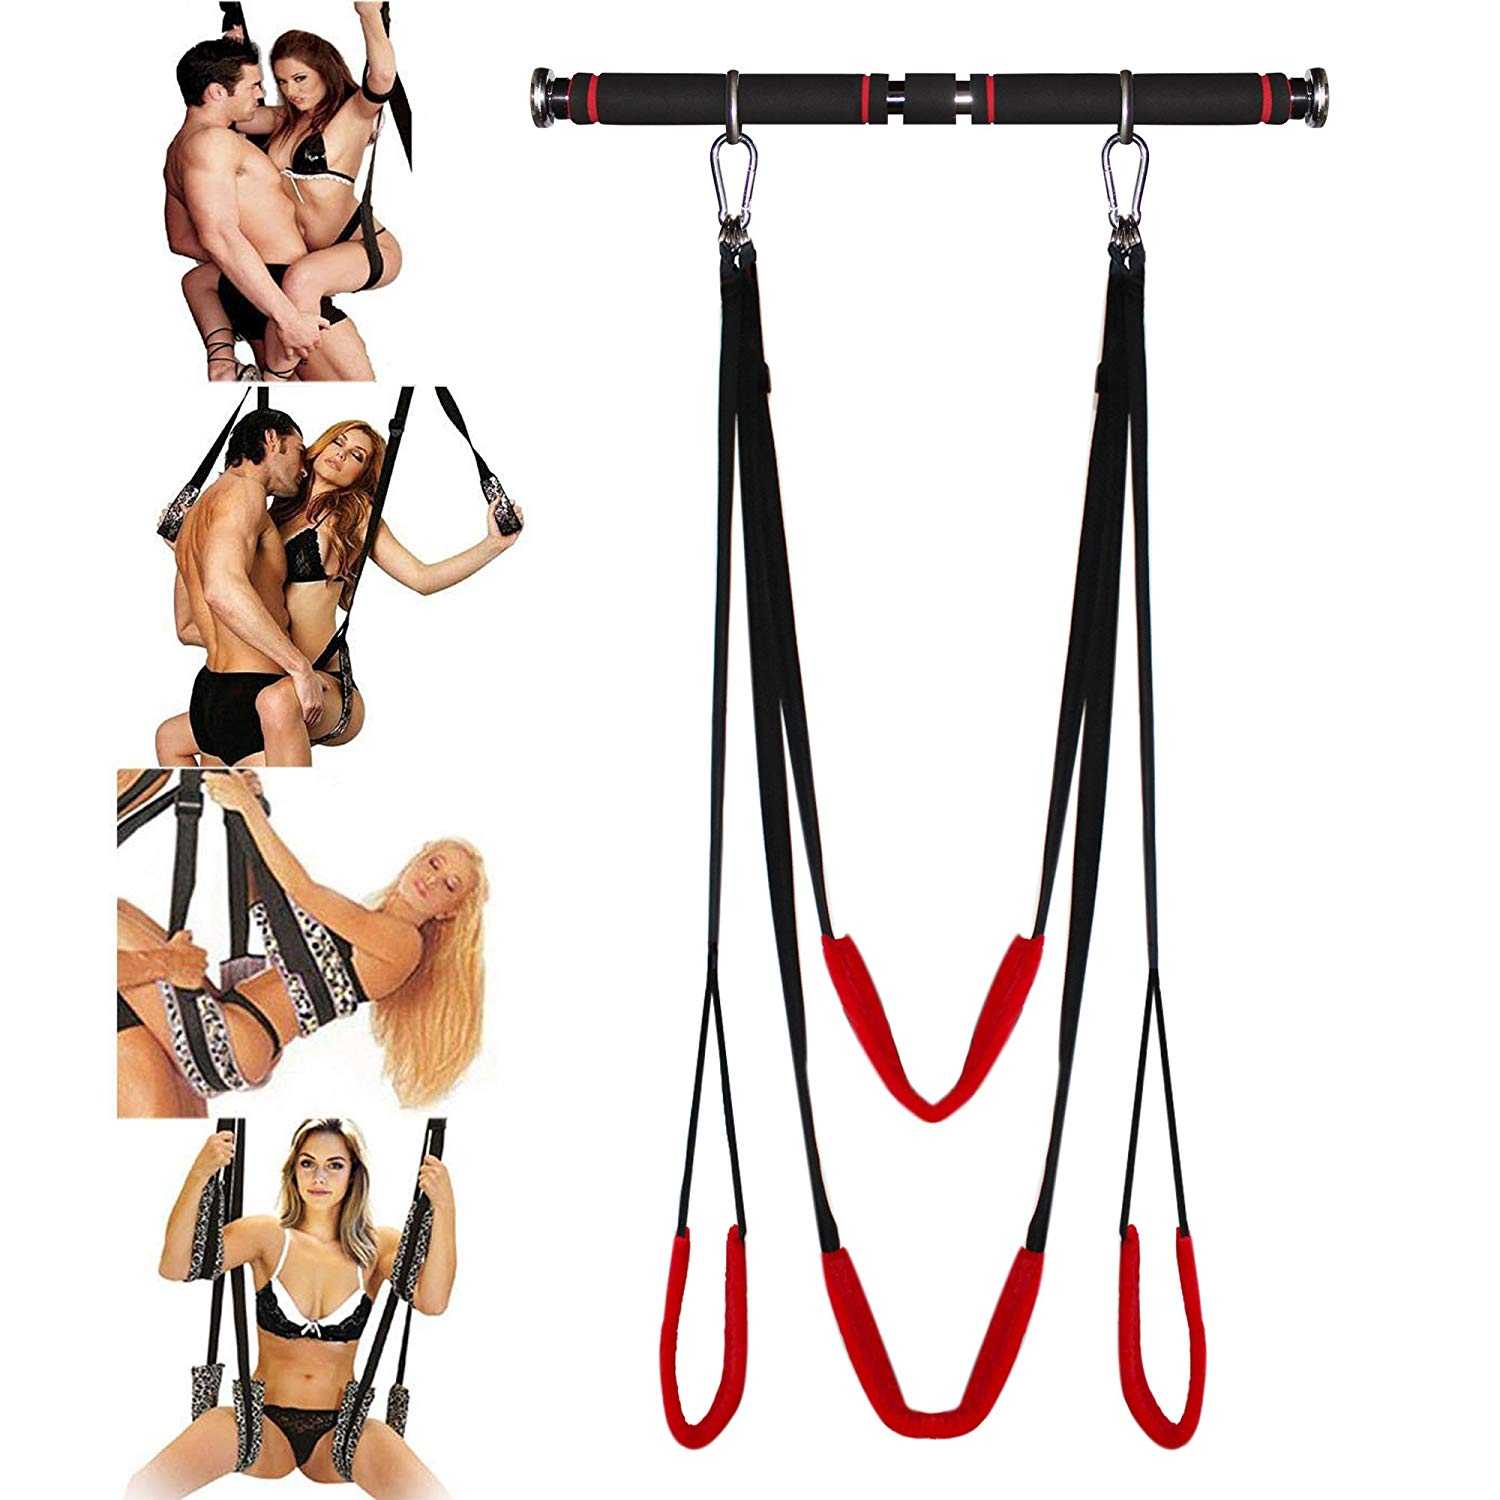 BDSM Adult Sex Swing Straps Door Hanging Sexual Taste For Couple Game Bondage Sex Product